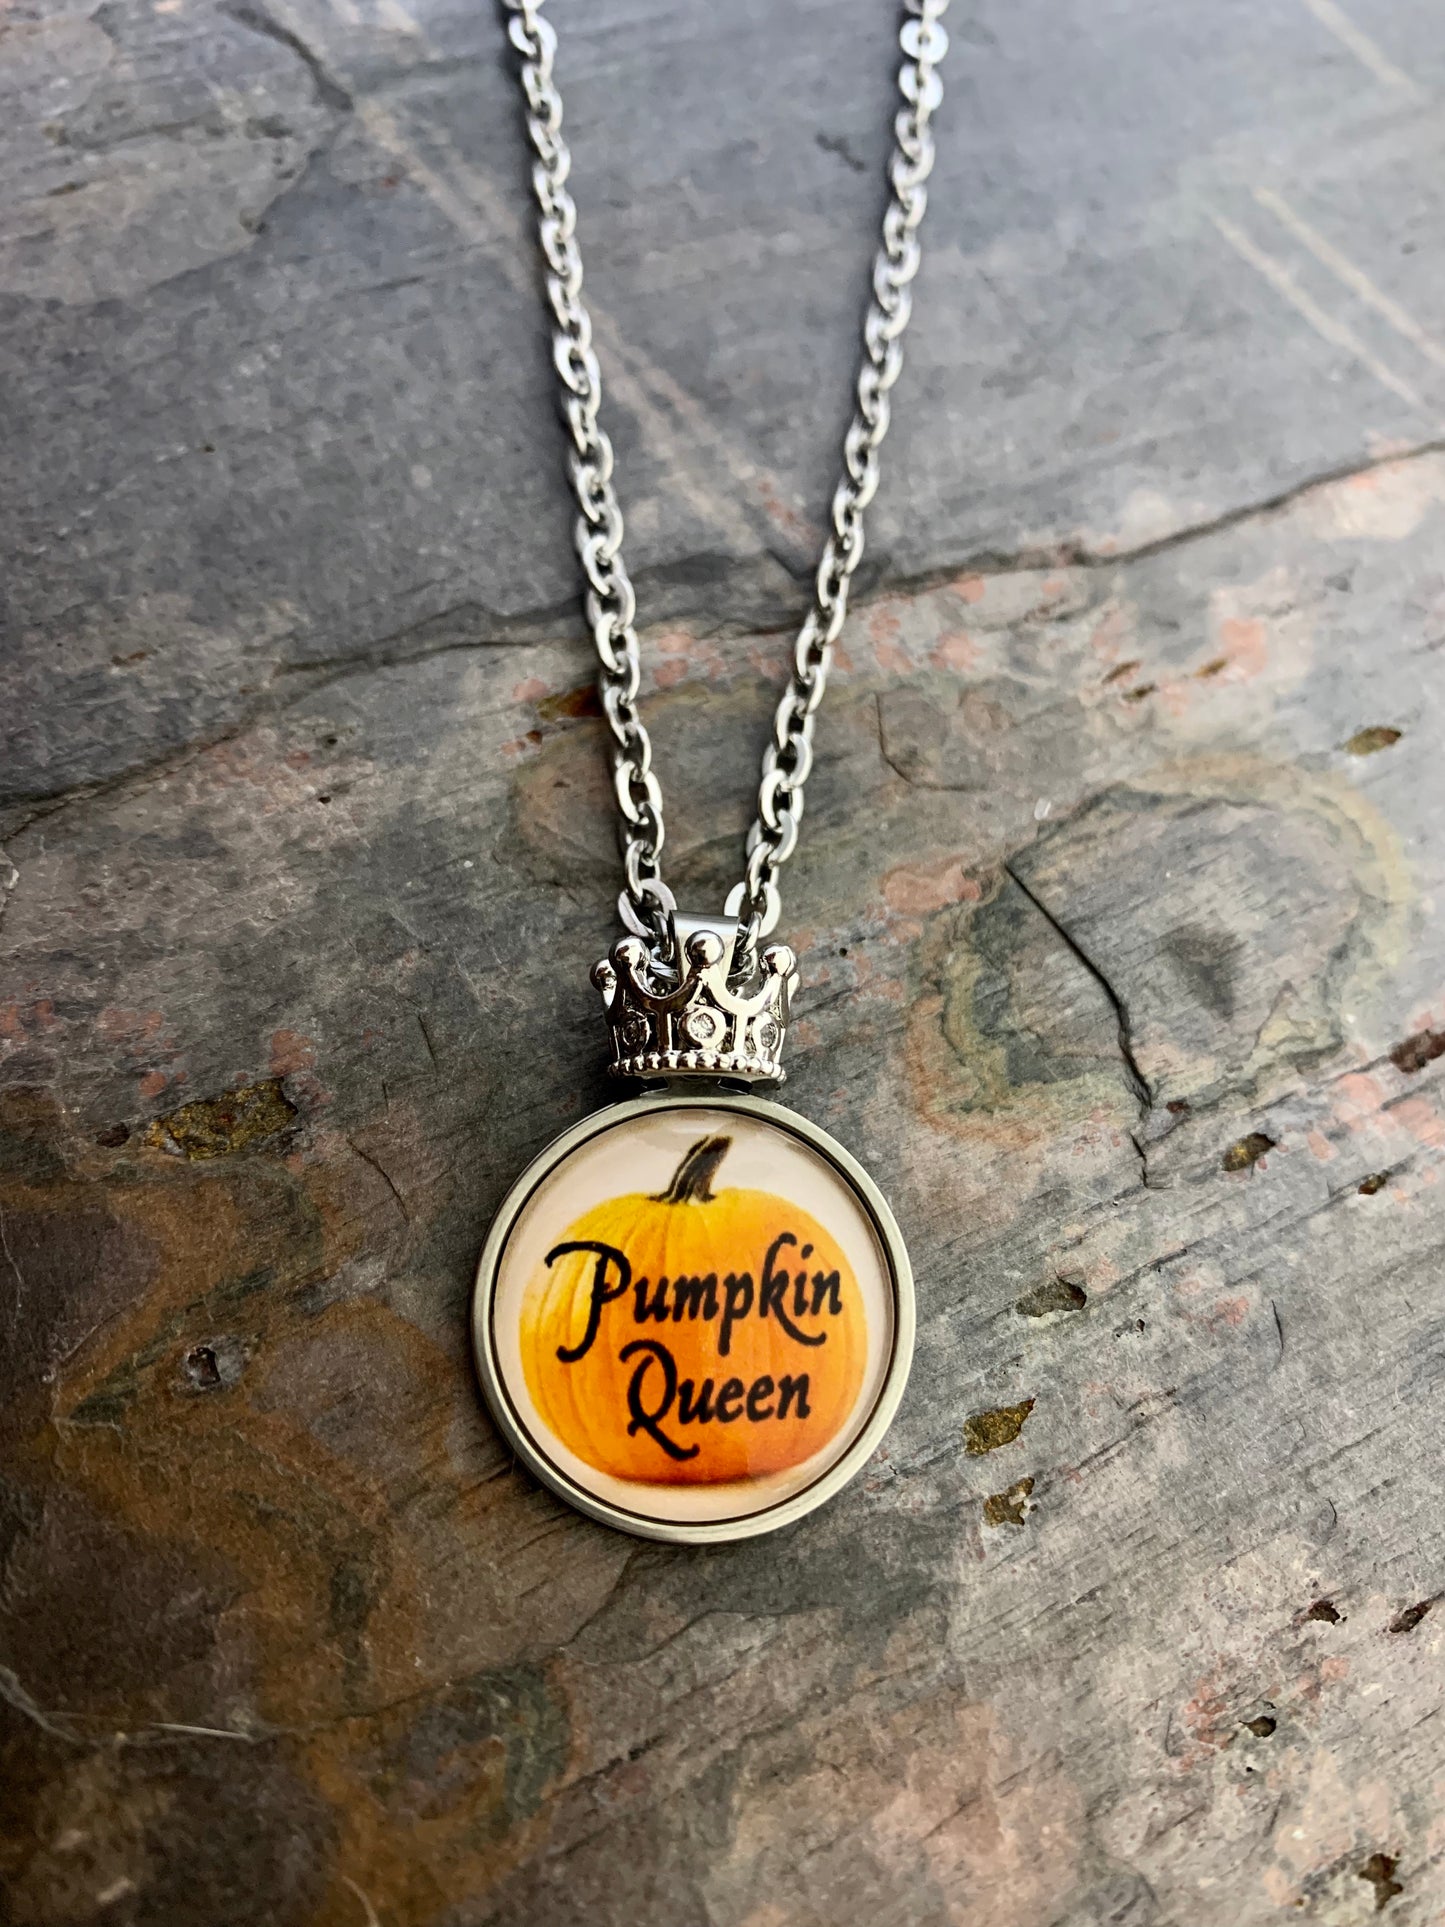 Queen Bee Necklace OR Keychain (other charm options available)